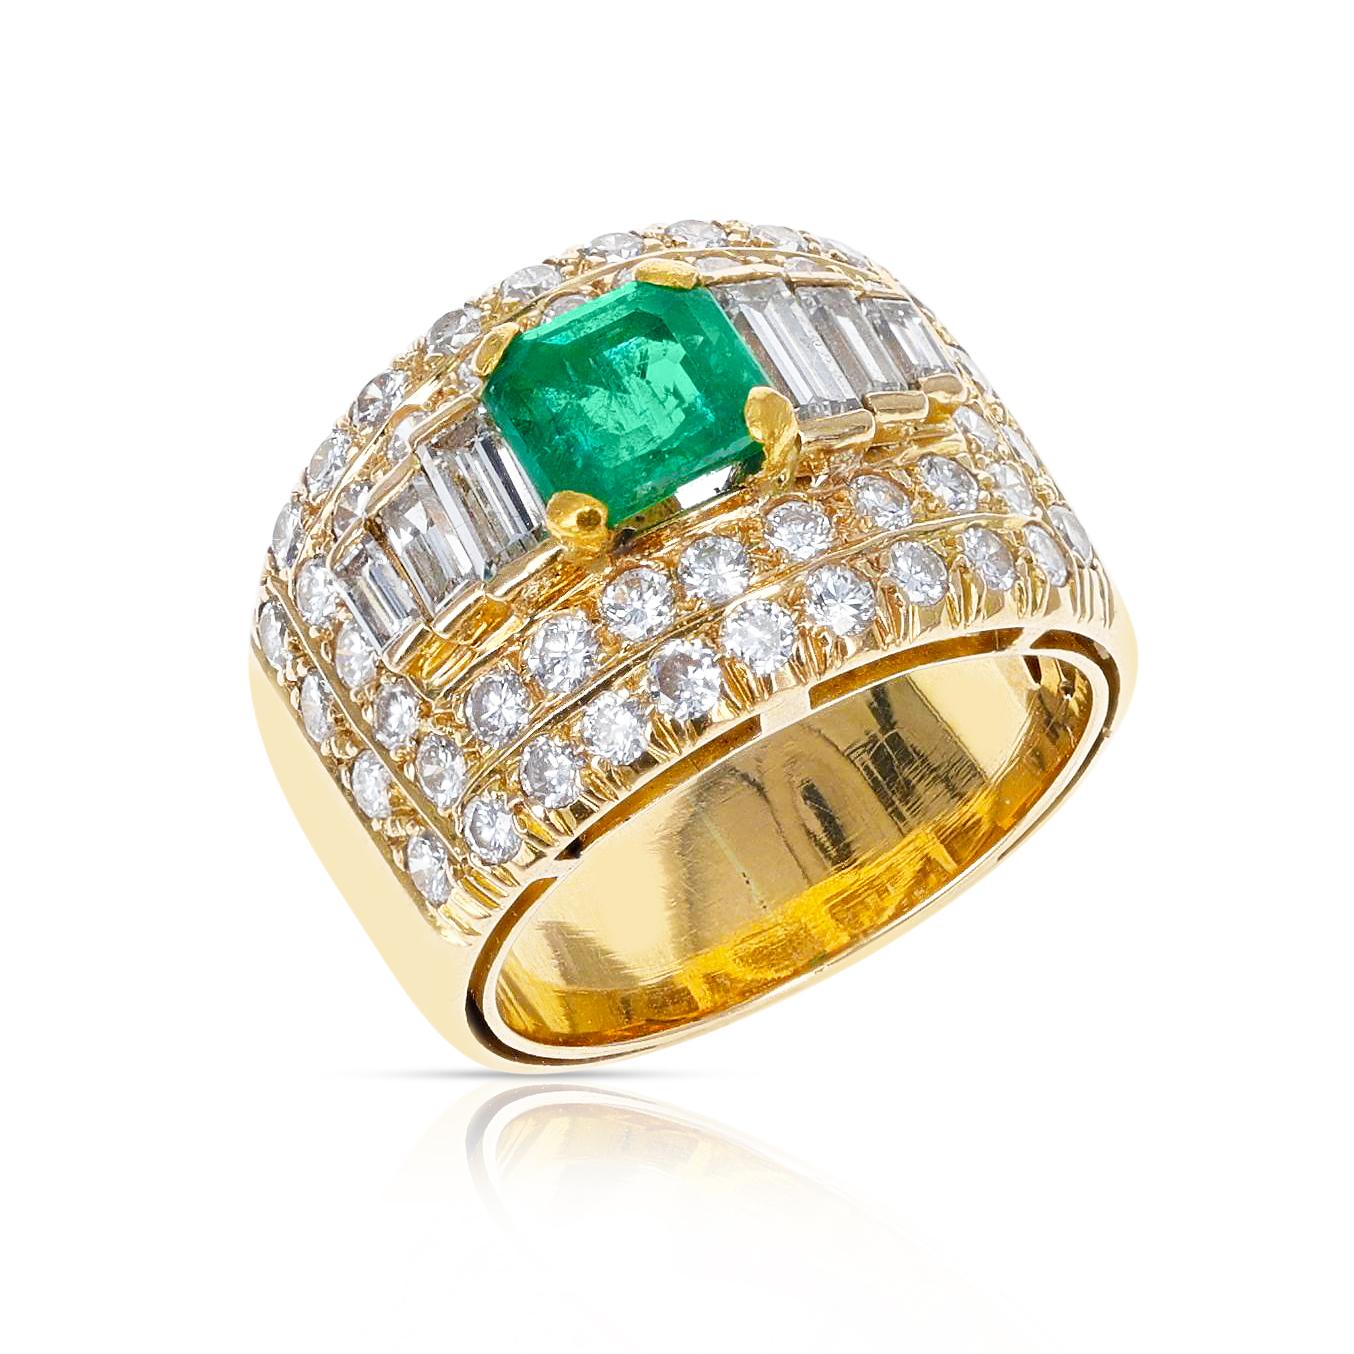 A 1.15 ct. Square Emerald with 2 ct. Diamond Wide Band Cocktail Ring made in 18K Yellow Gold. Ring Size US 6.50. Total Weight: 14.95 grams. 